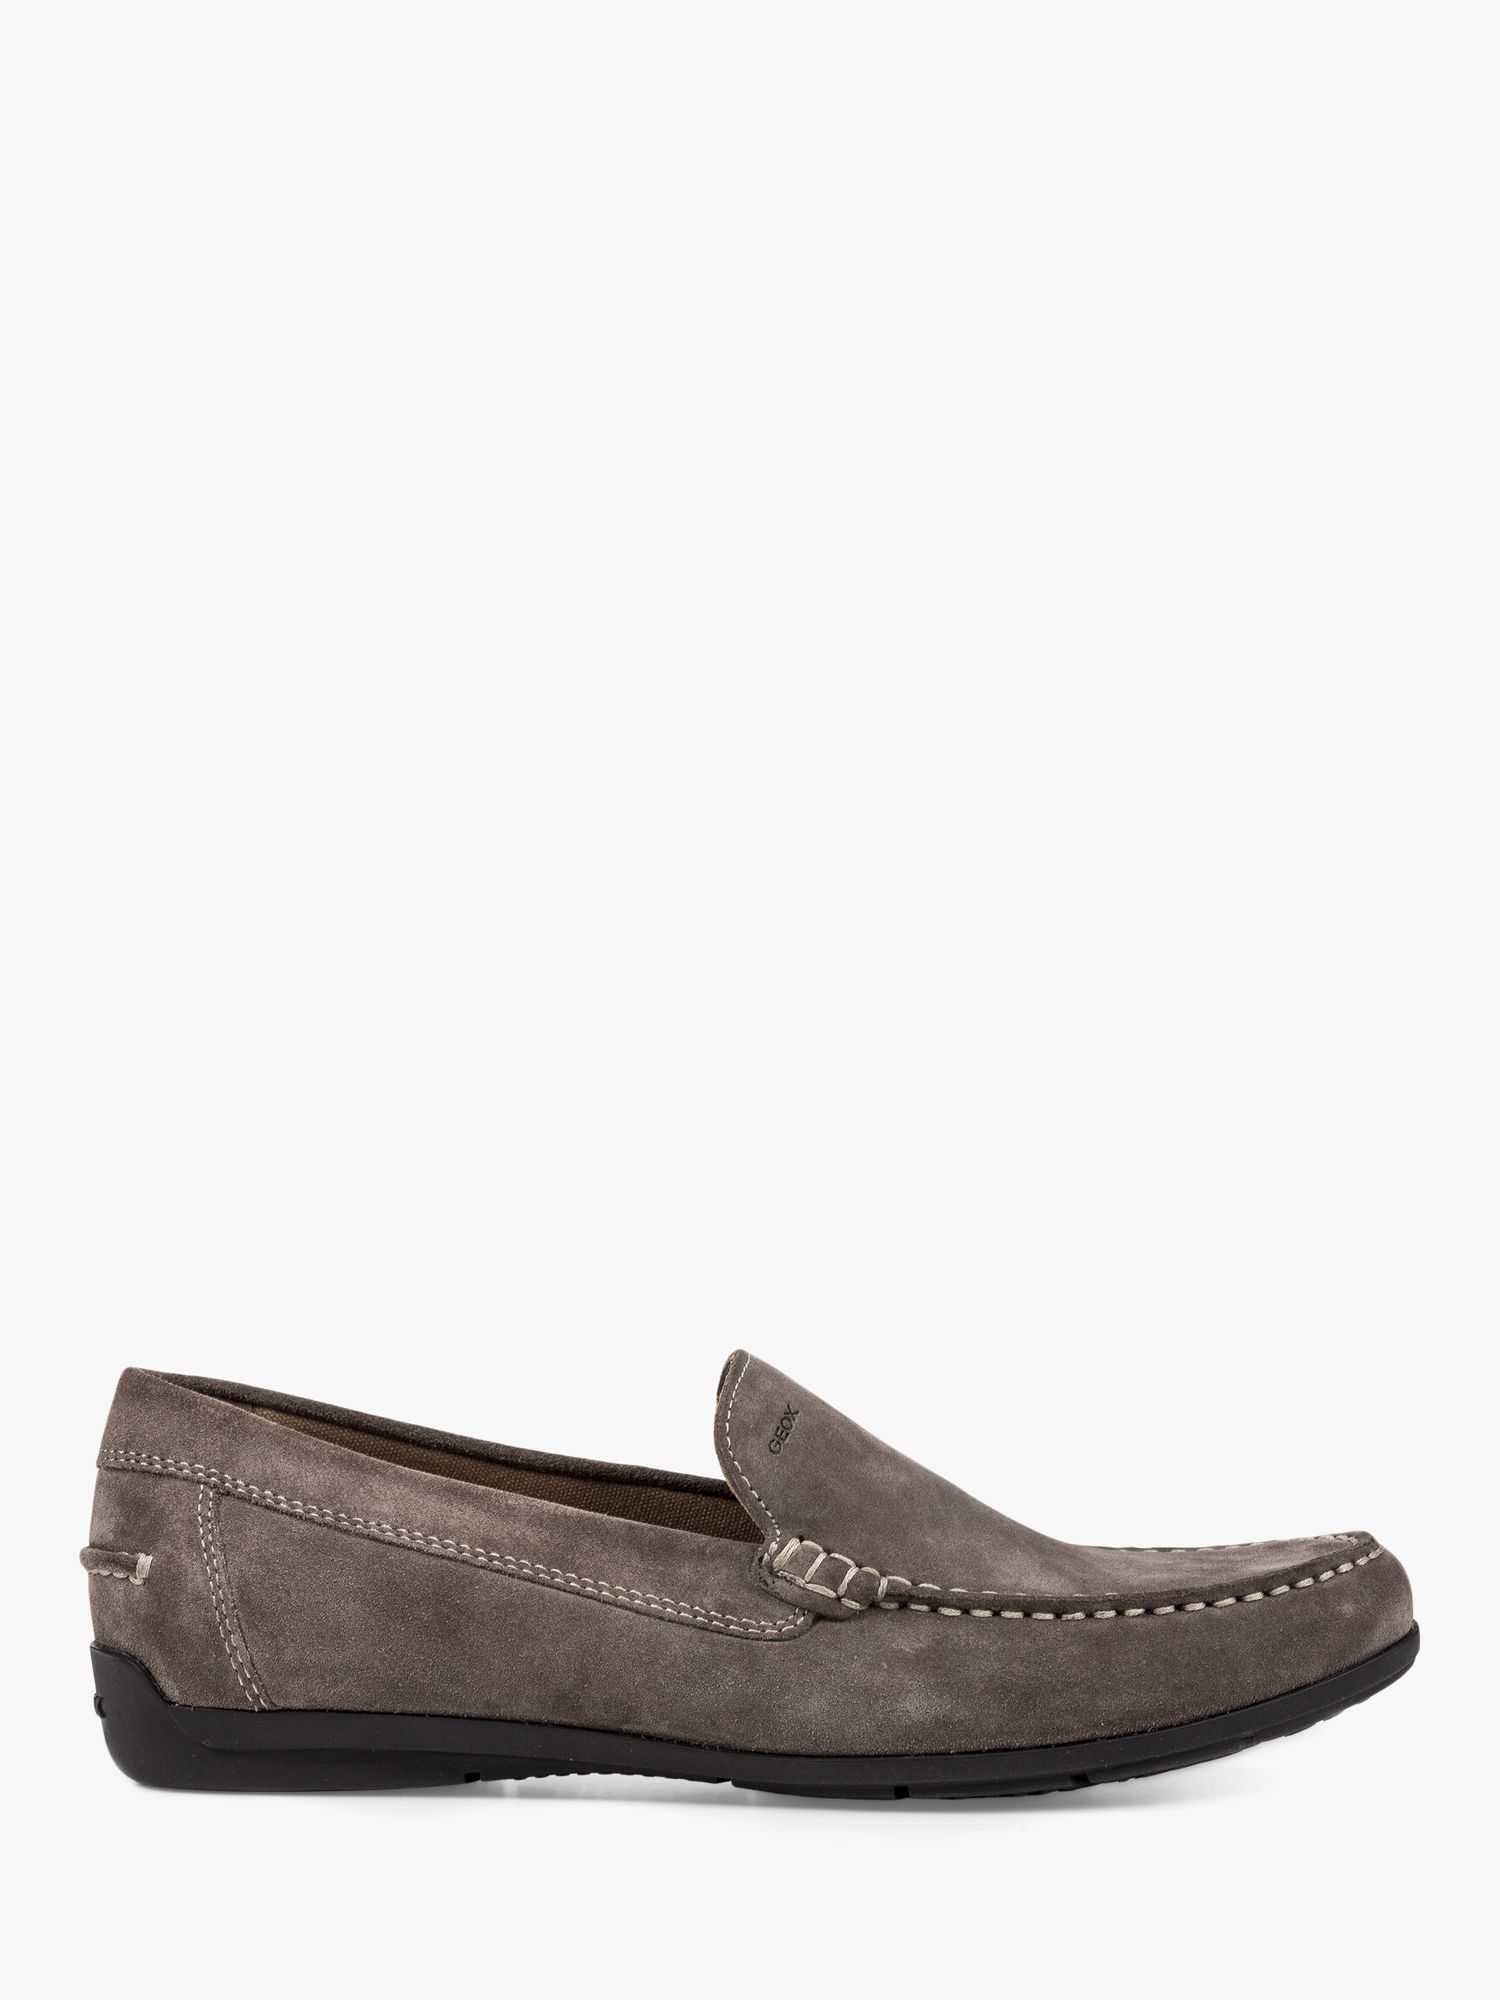 Geox Simon Suede Moccasins, Taupe